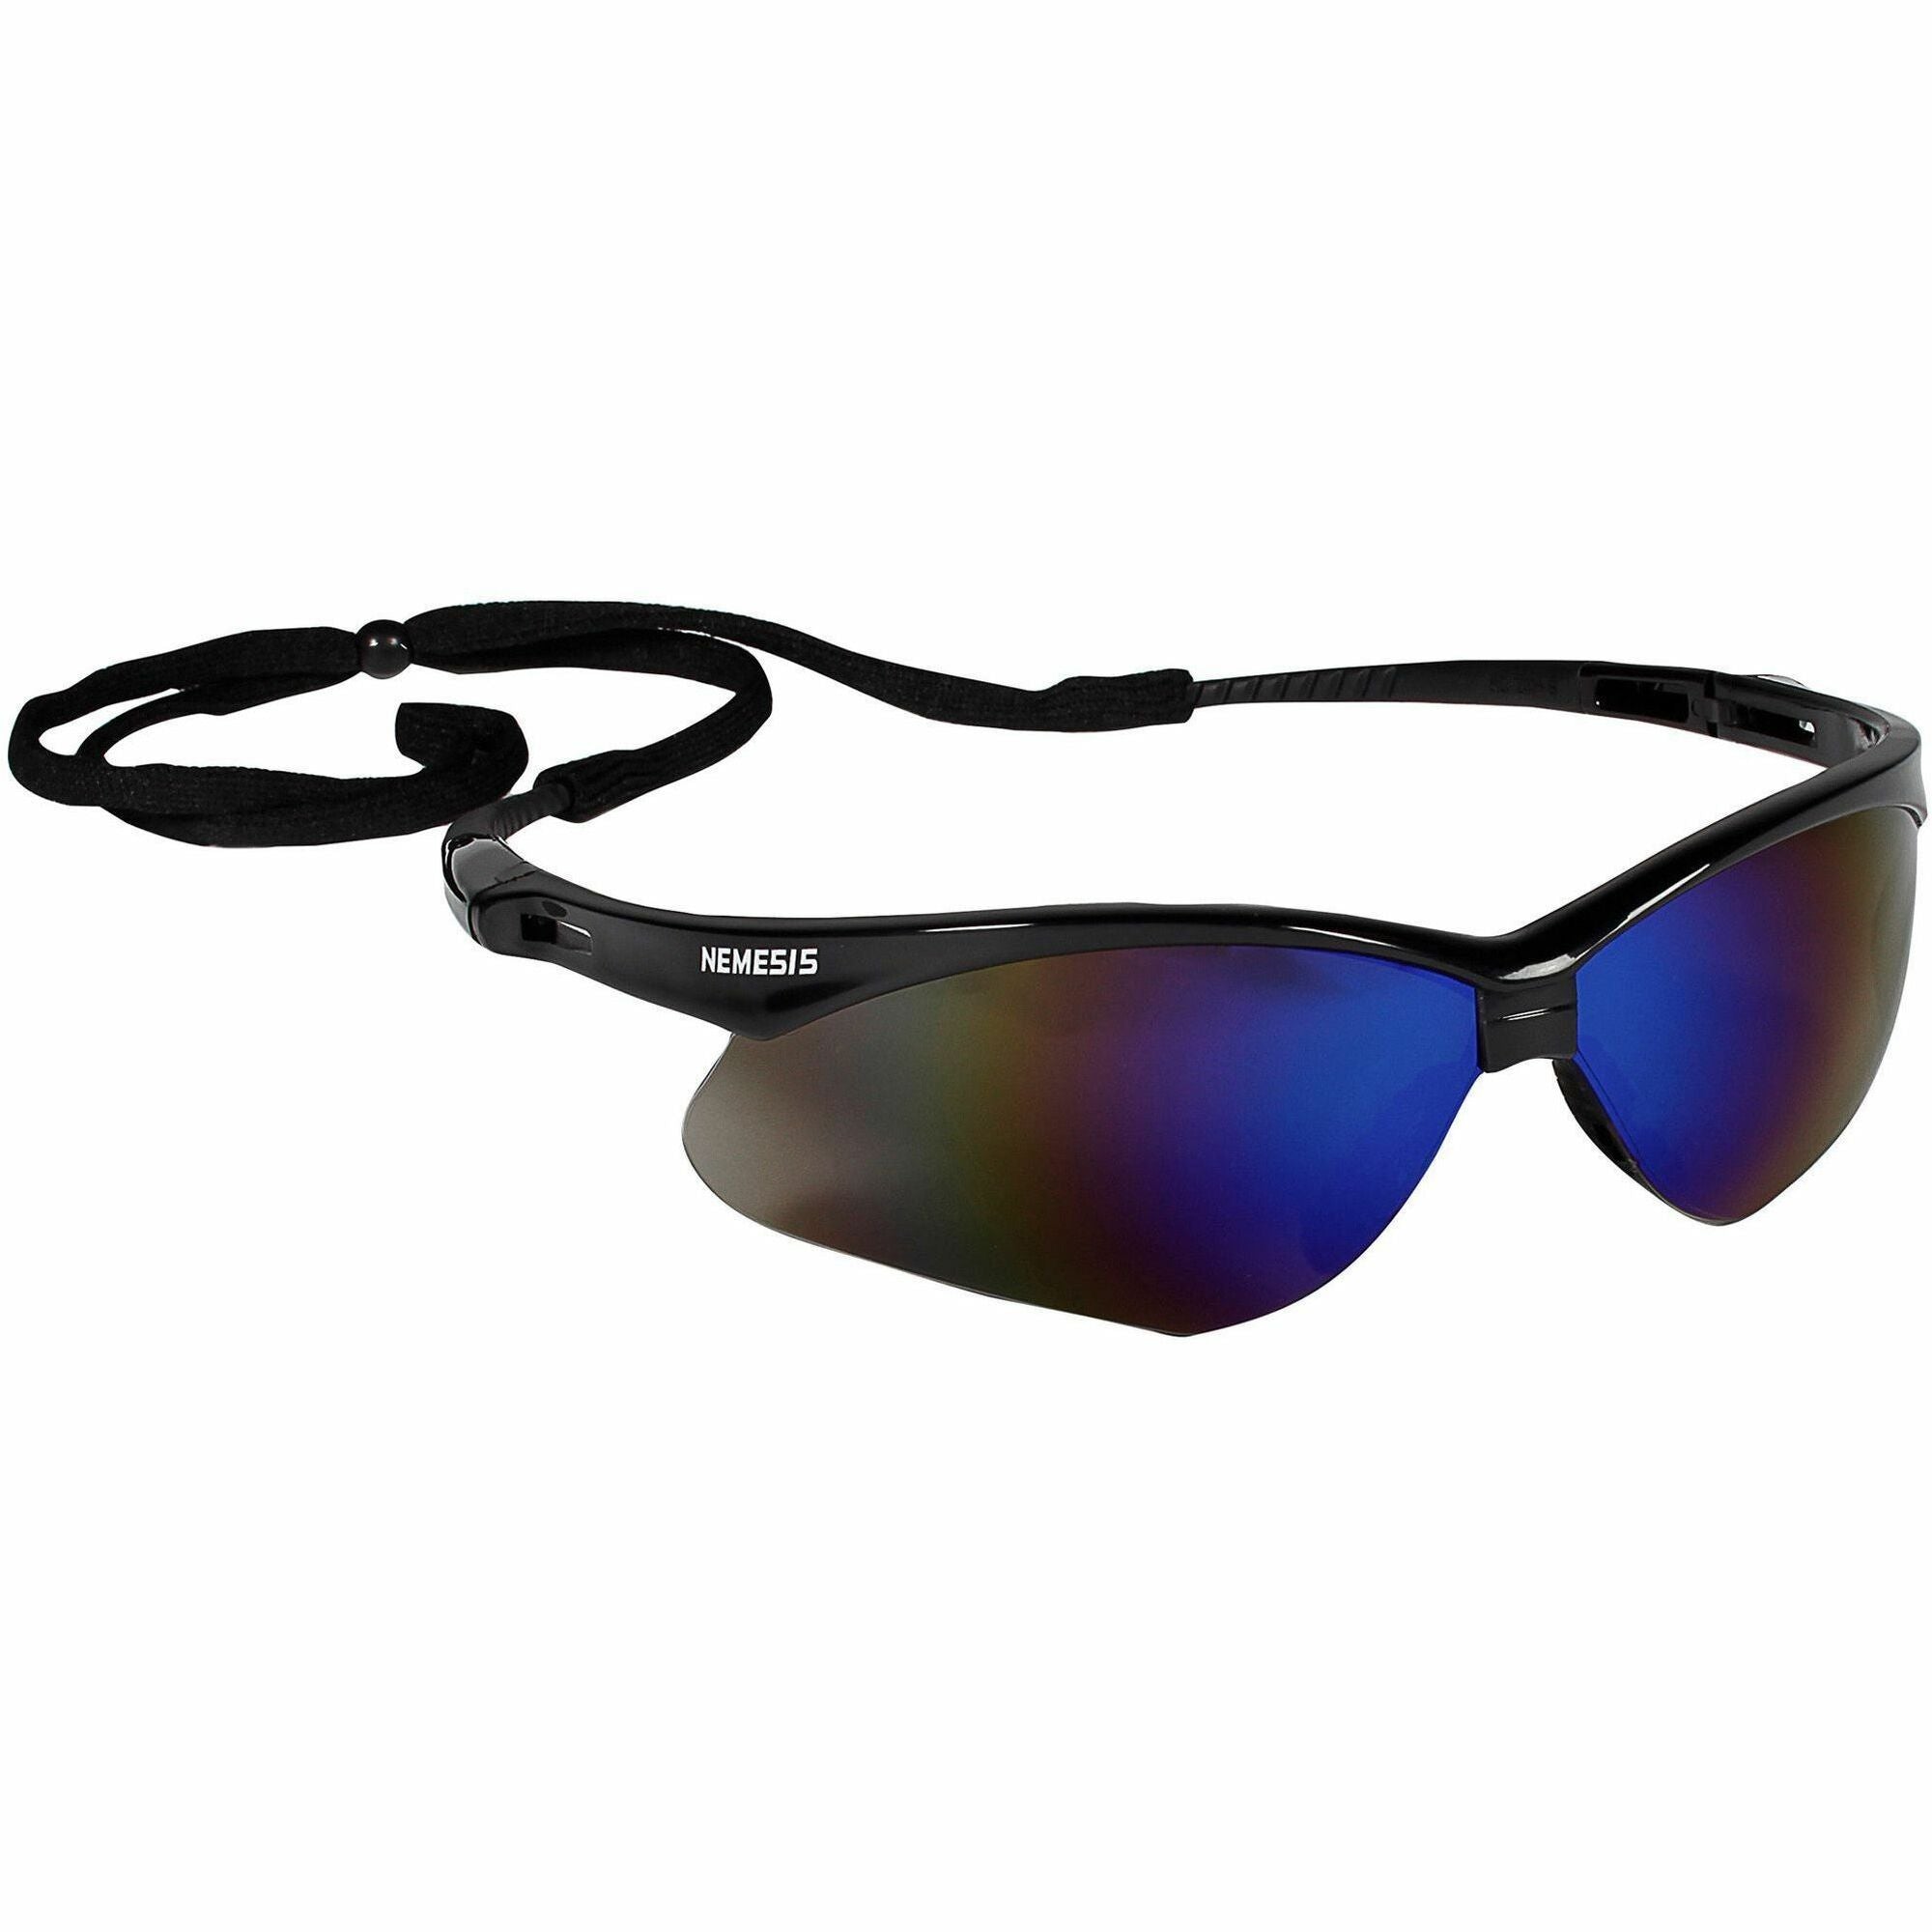 kleenguard-v30-nemesis-safety-eyewear-recommended-for-workplace-home-uva-uvb-uvc-protection-polycarbonate-durable-lightweight-wraparound-frame-anti-fog-flexible-soft-neck-cord-12-carton_kcc14481ct - 1